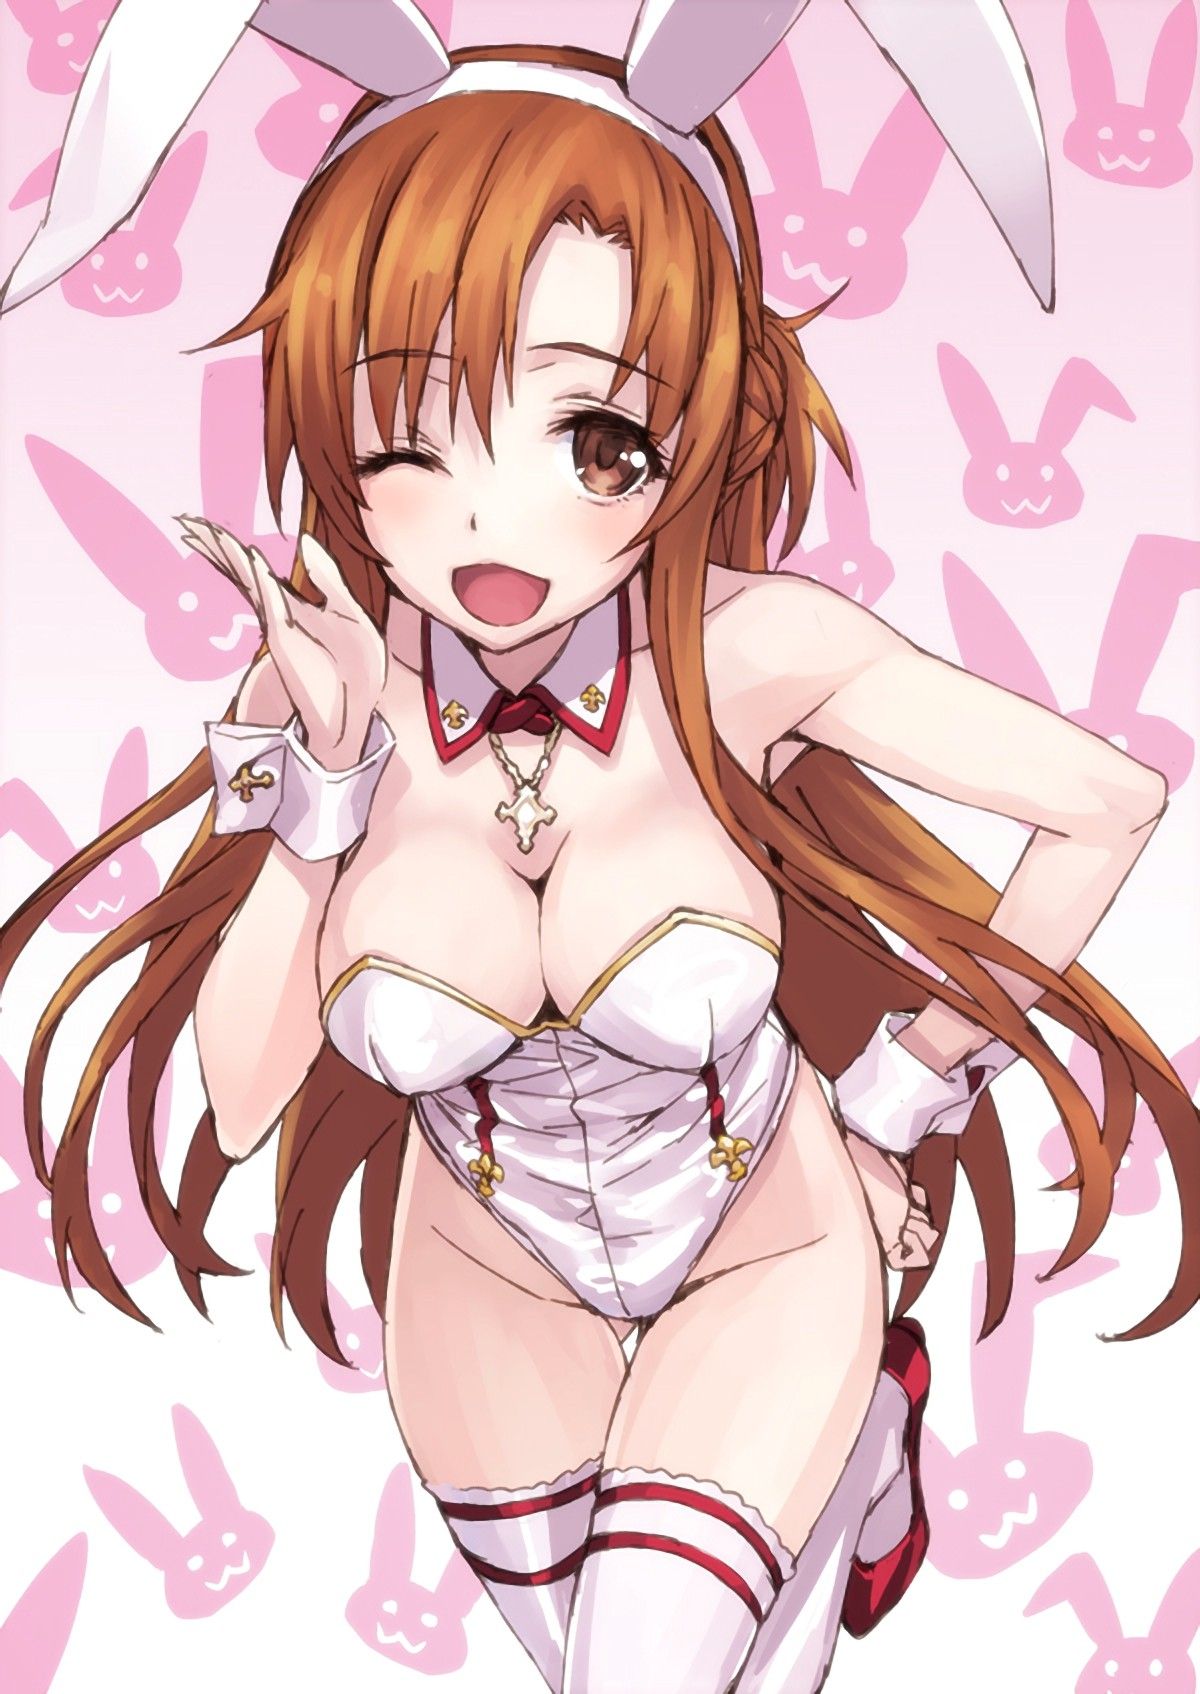 Two-dimensional Bunny girl erotic pictures. This would take away! 5